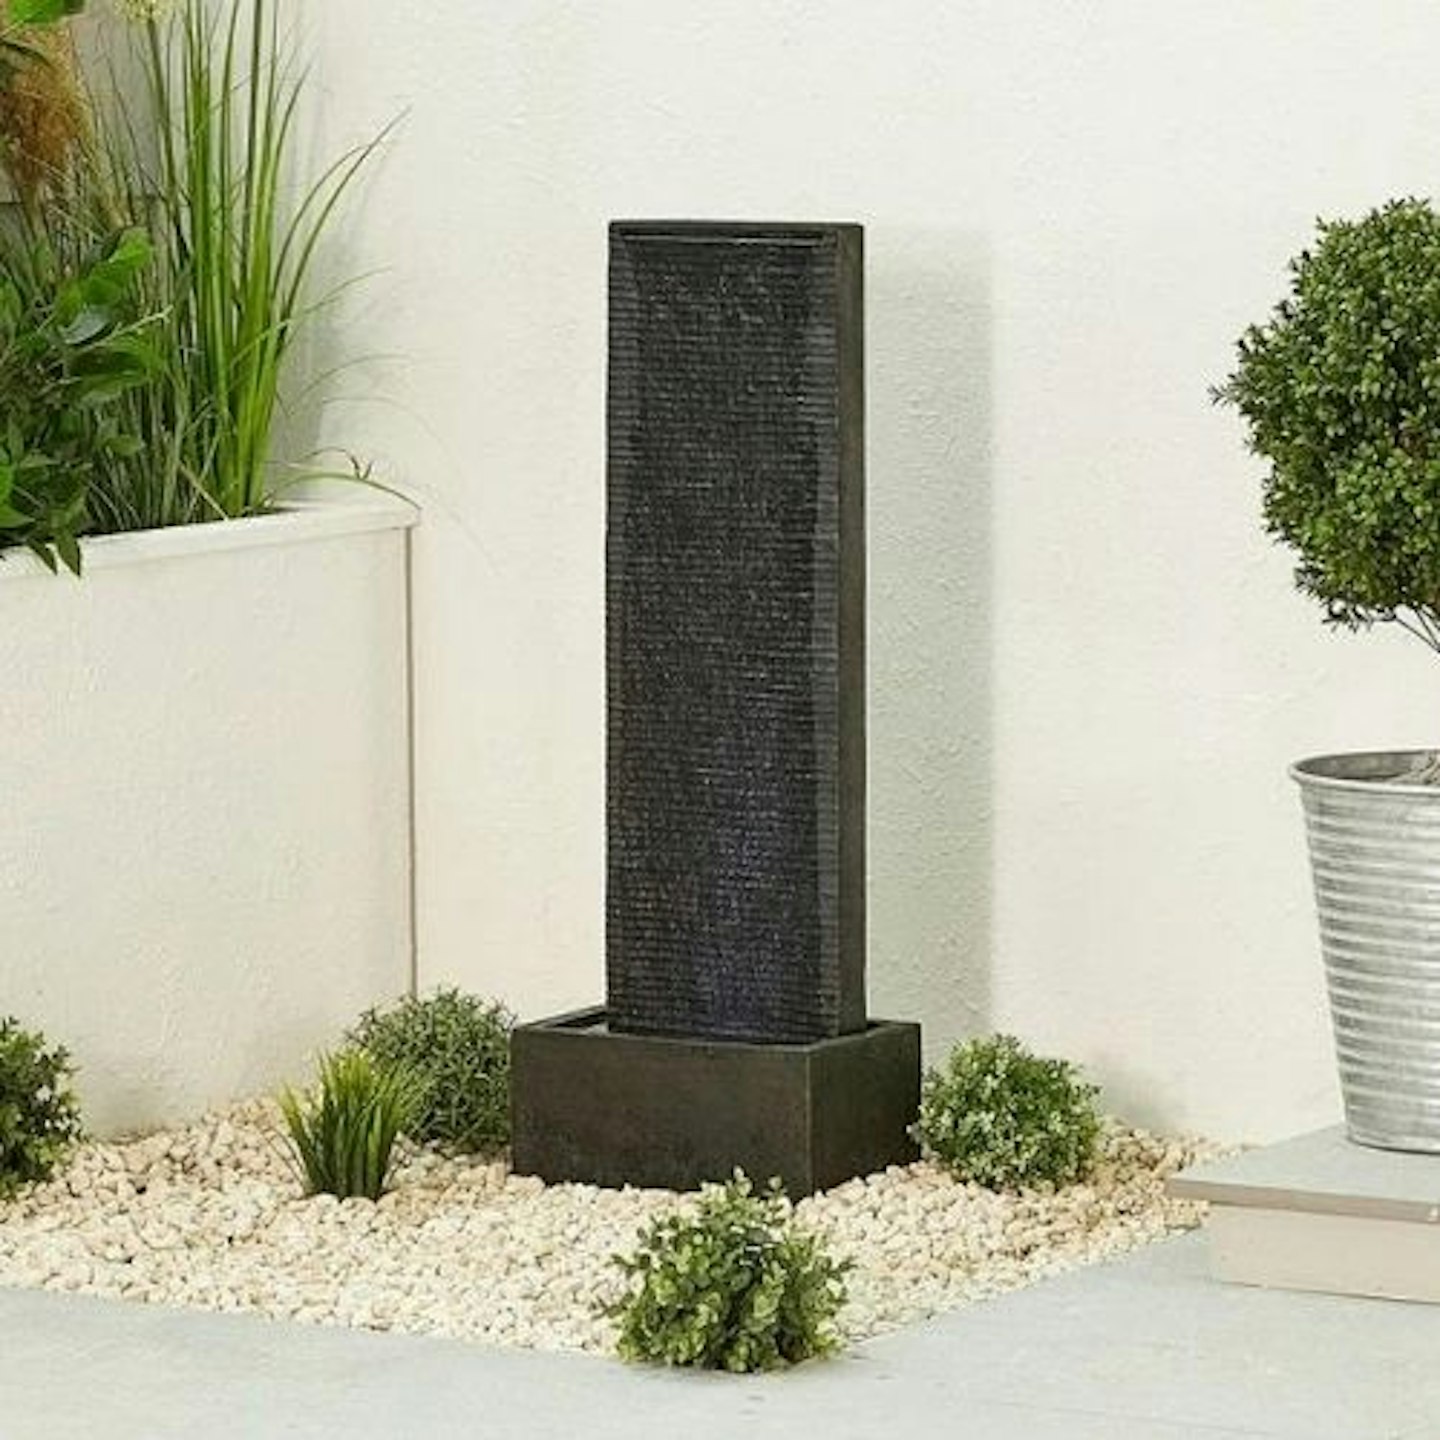 Yanique Resin Webster Water Wall Fountain